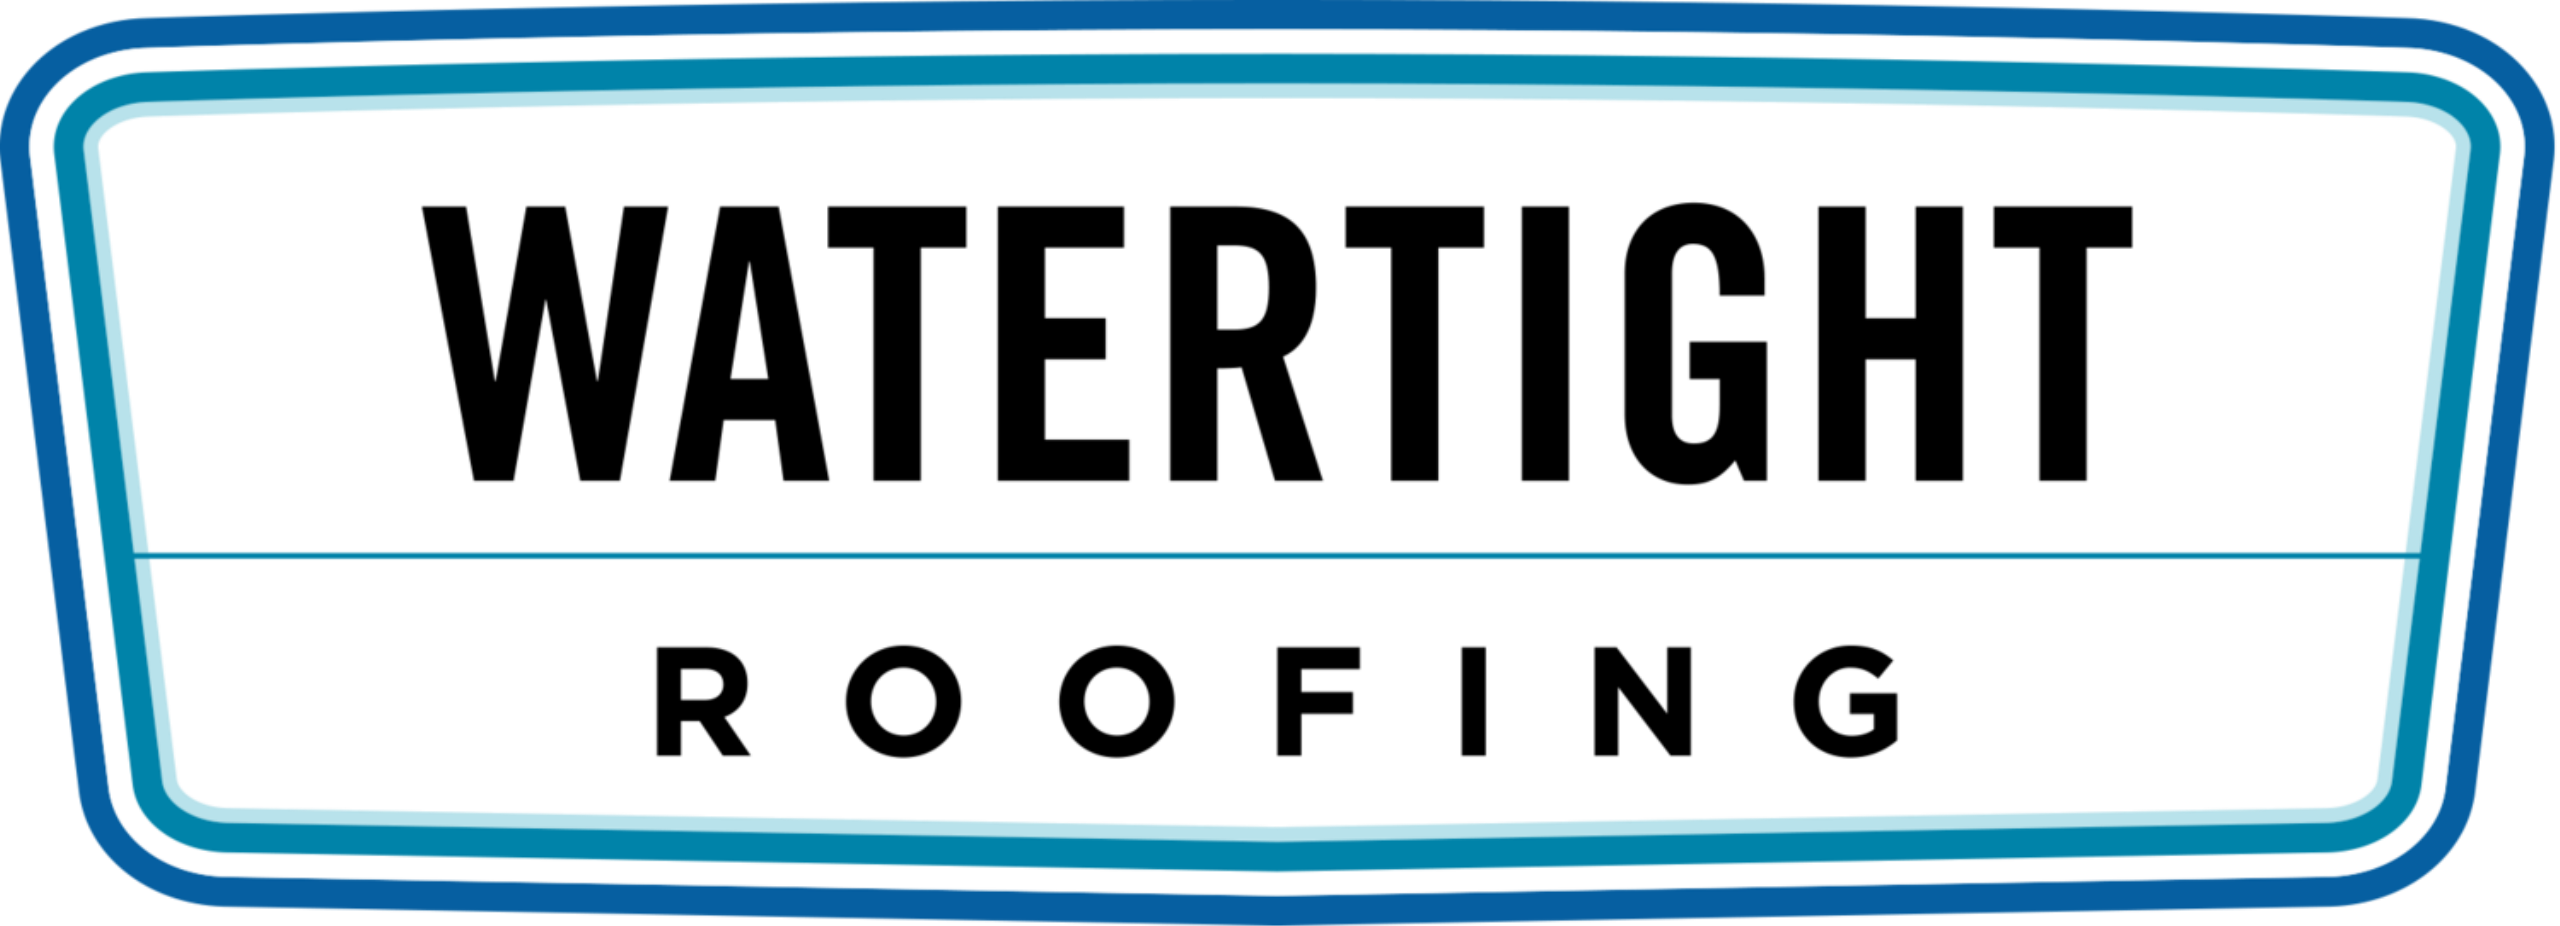 Watertight Roofing Services, LLC Logo